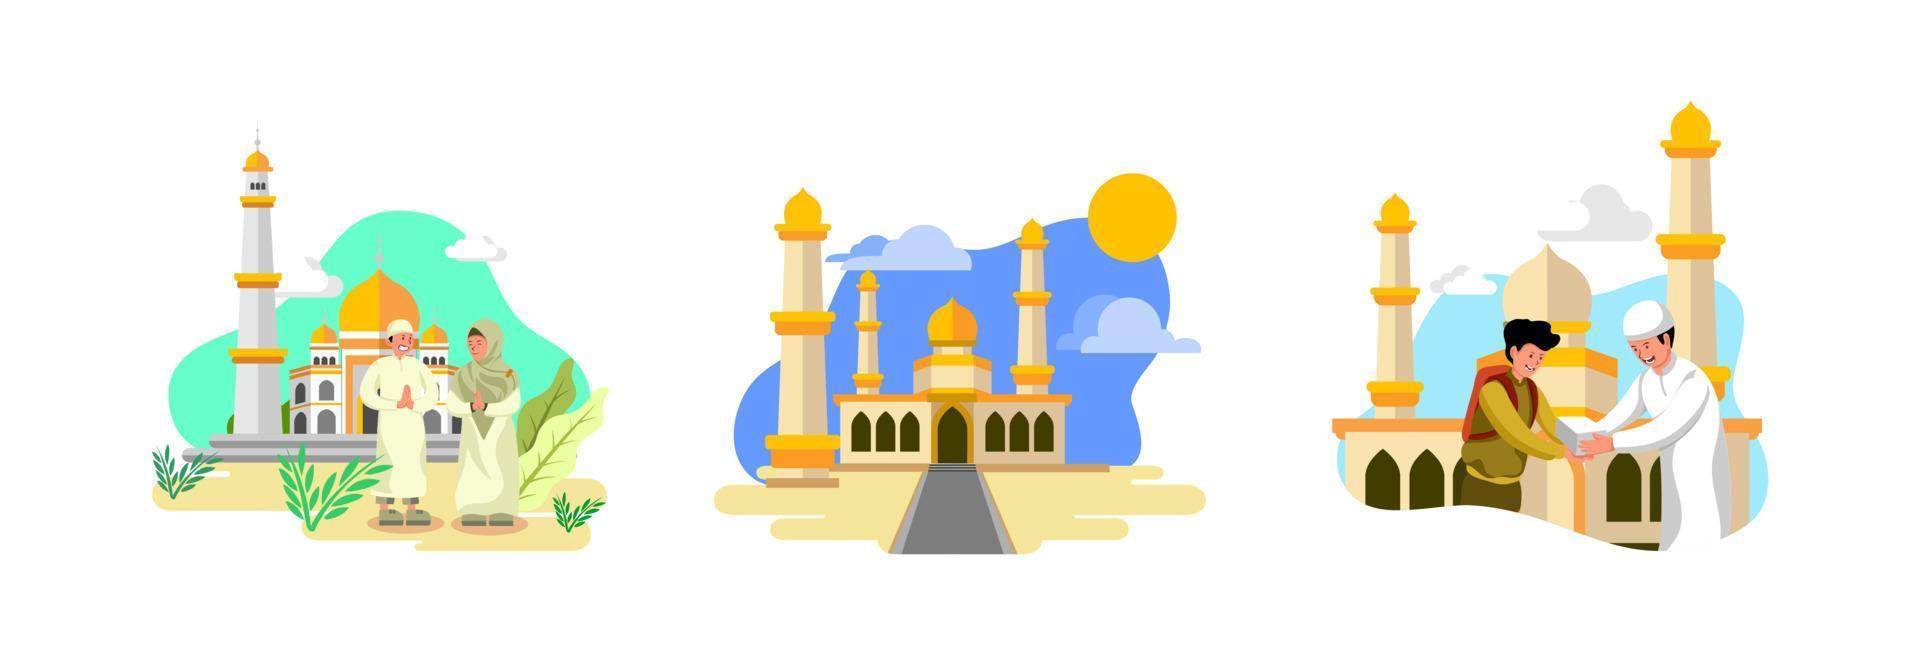 Mosque Illustration Set in Flat Design Style with Silaturahmi and Forgiveness Concept vector